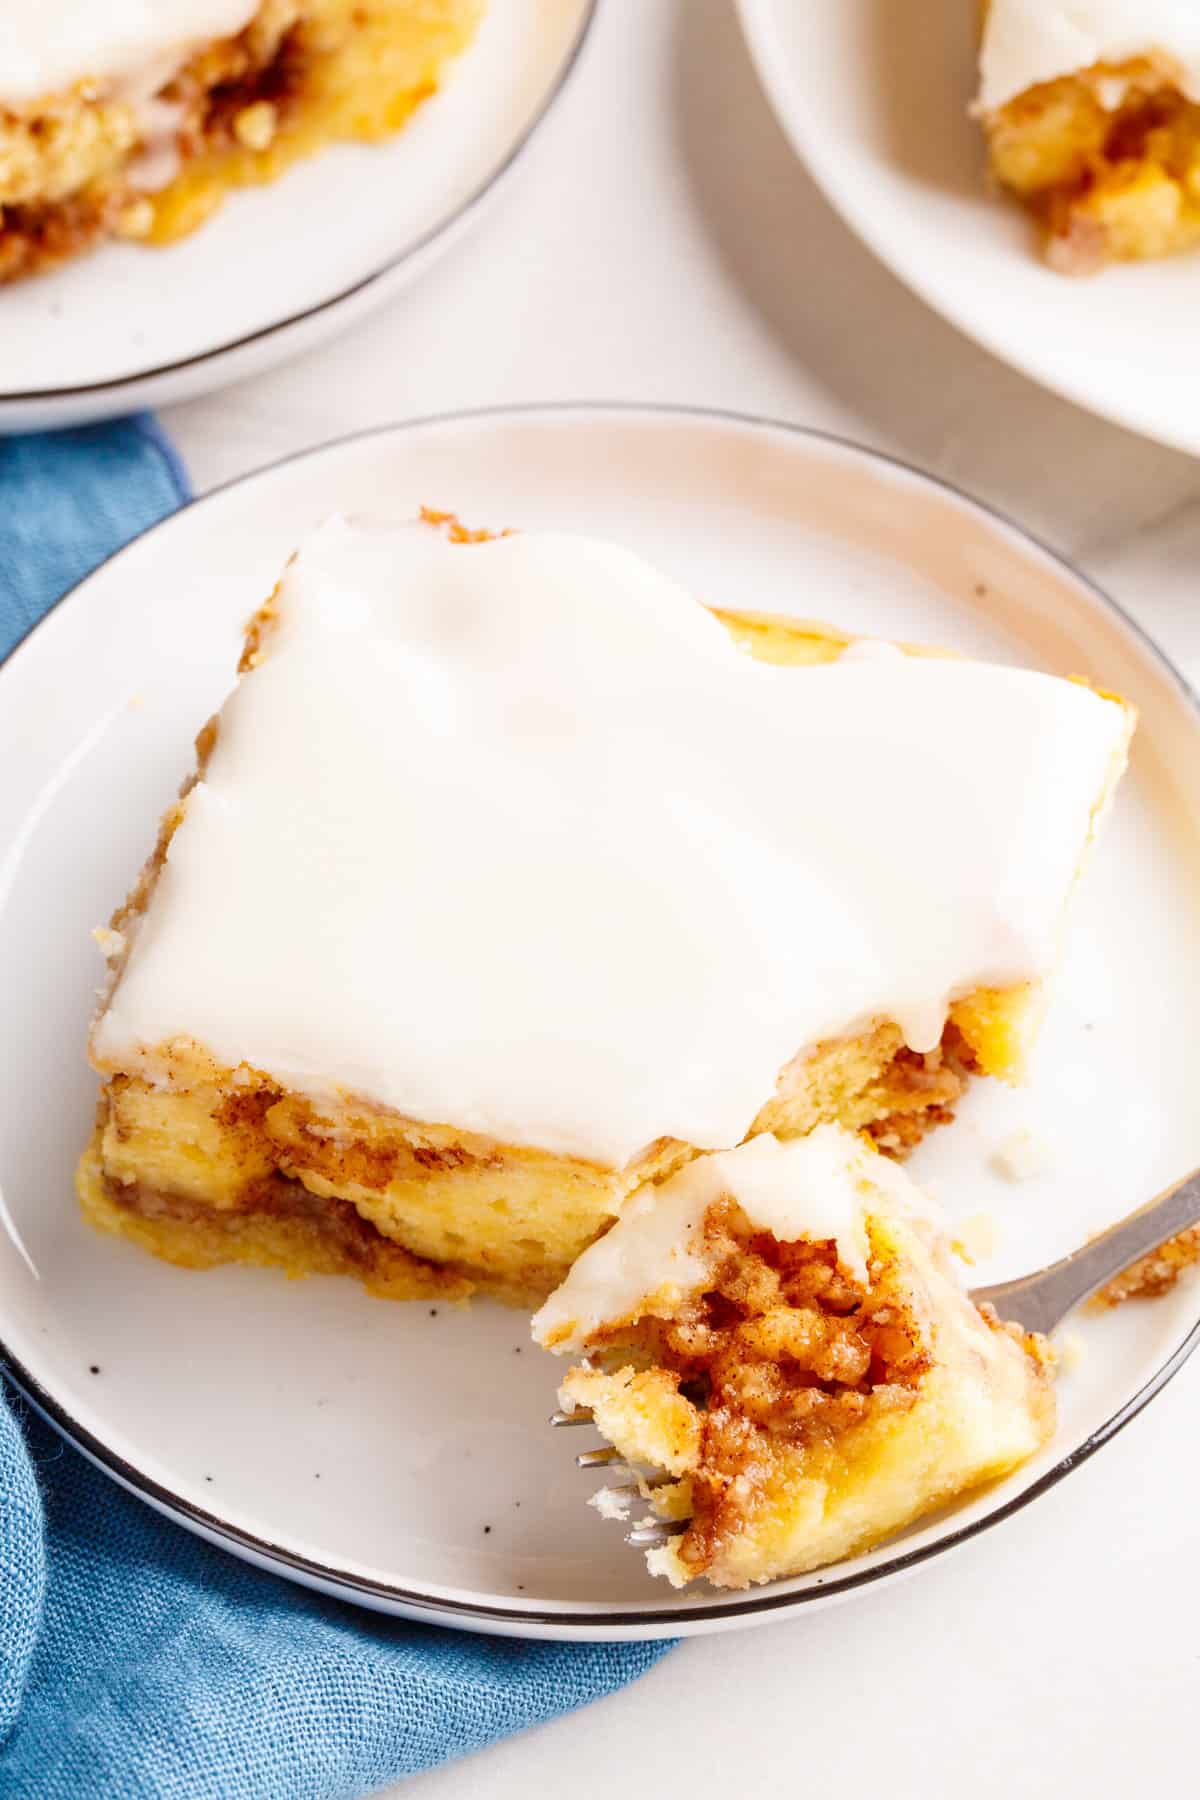 sqaure slice of cinnamon roll cake served on a white round plate